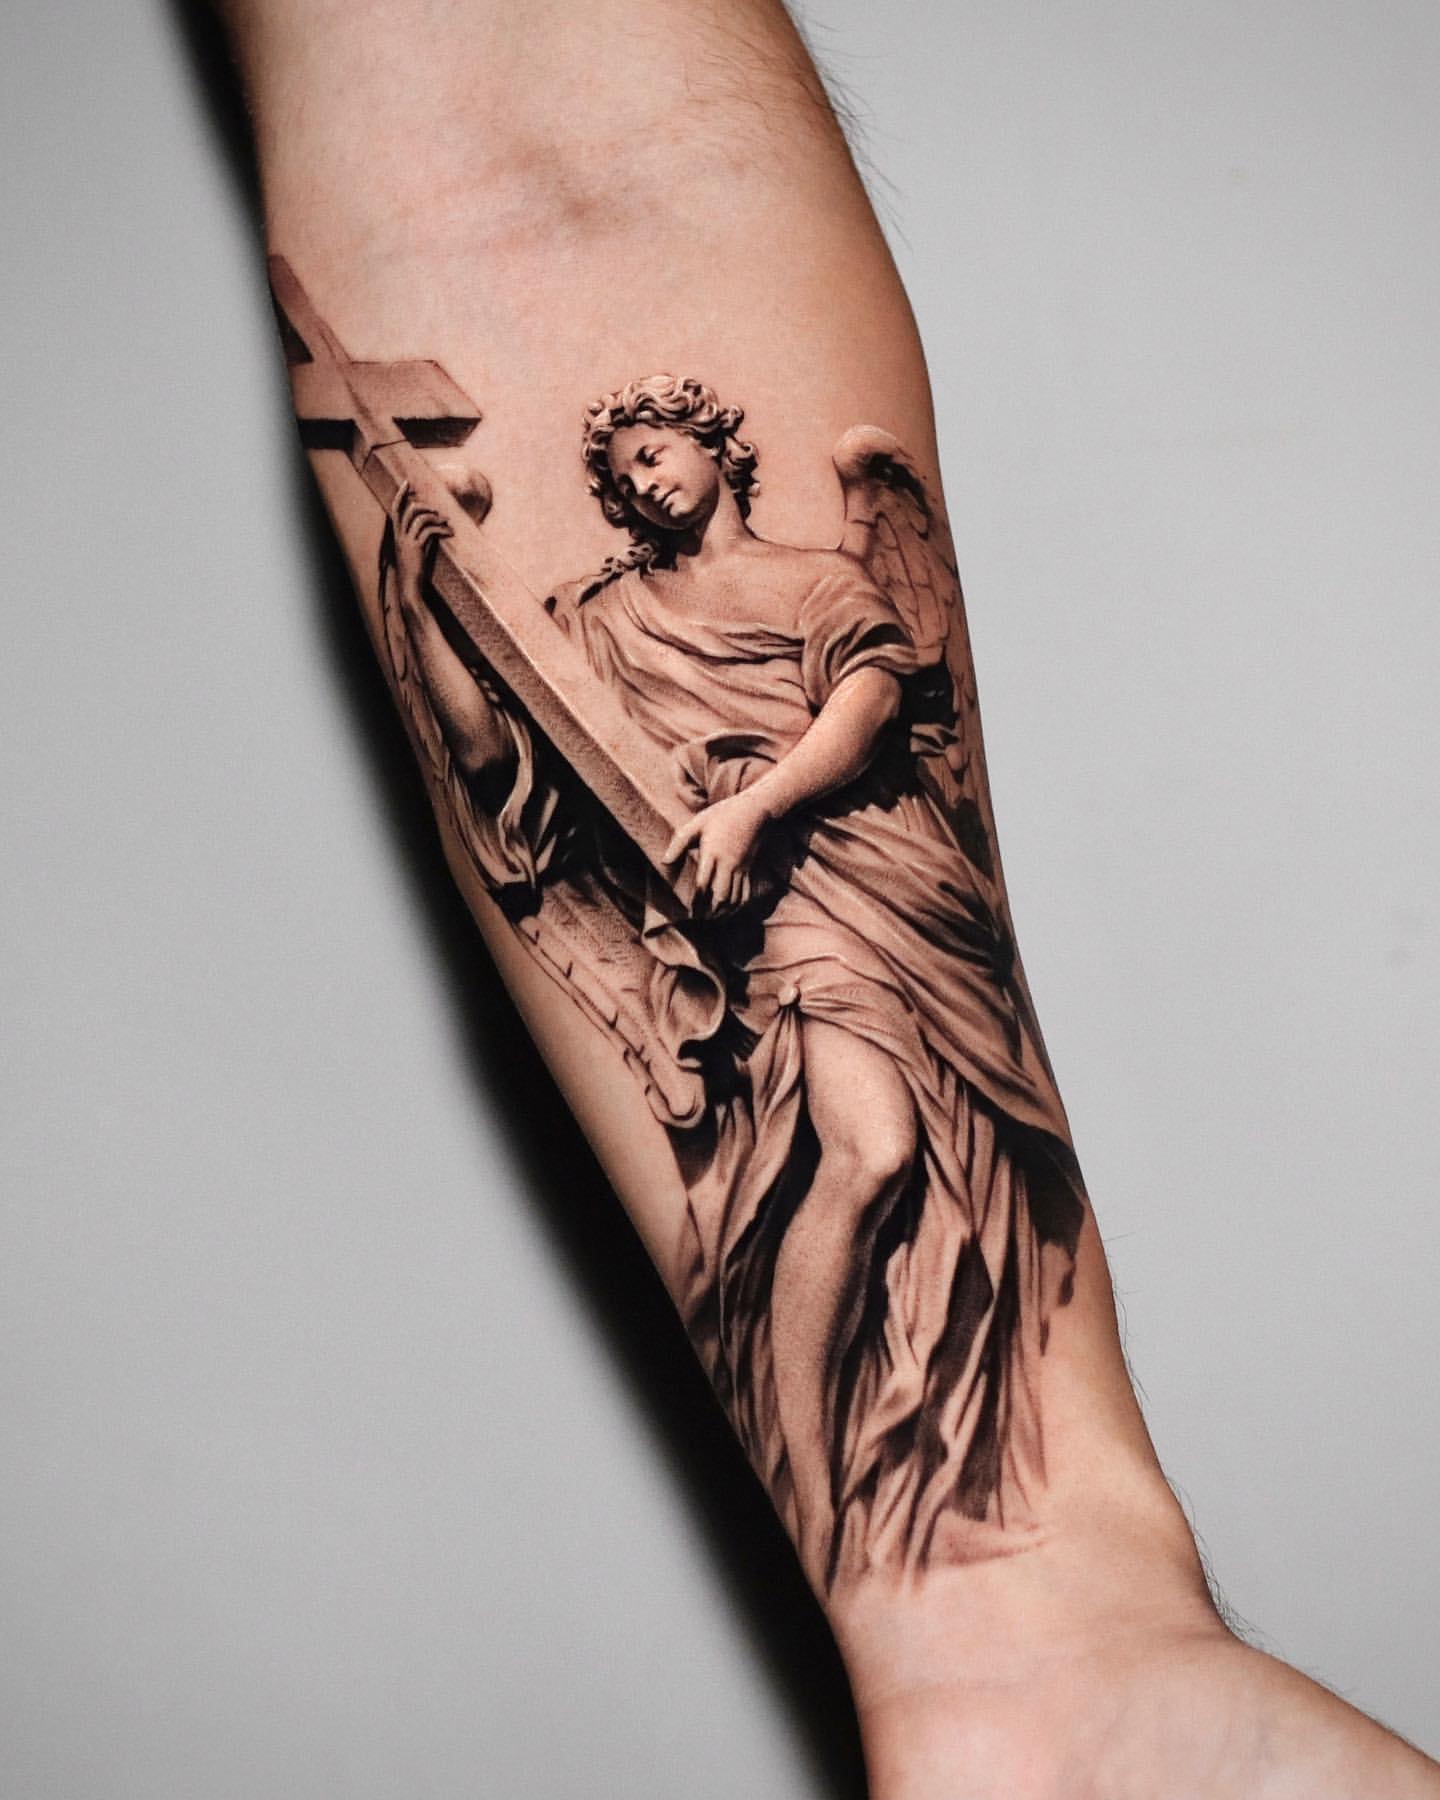 Angel tattoo on lower arm done by Chybs, Delft NL : r/tattoos